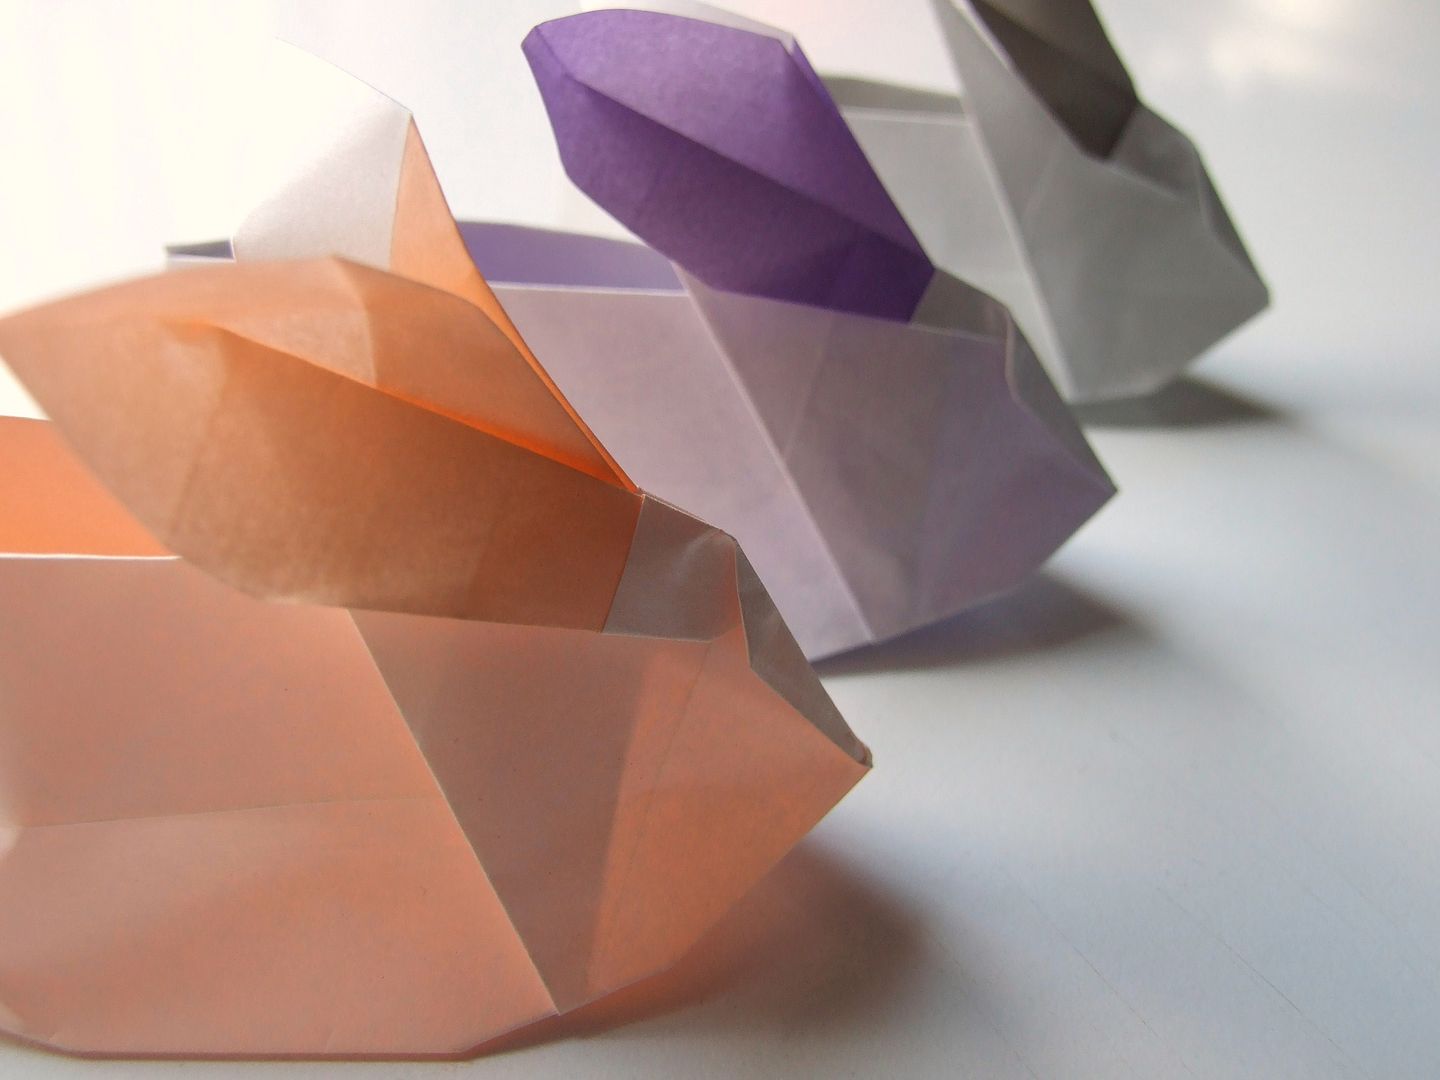 Origami Easter Bunnies - Gathering Beauty